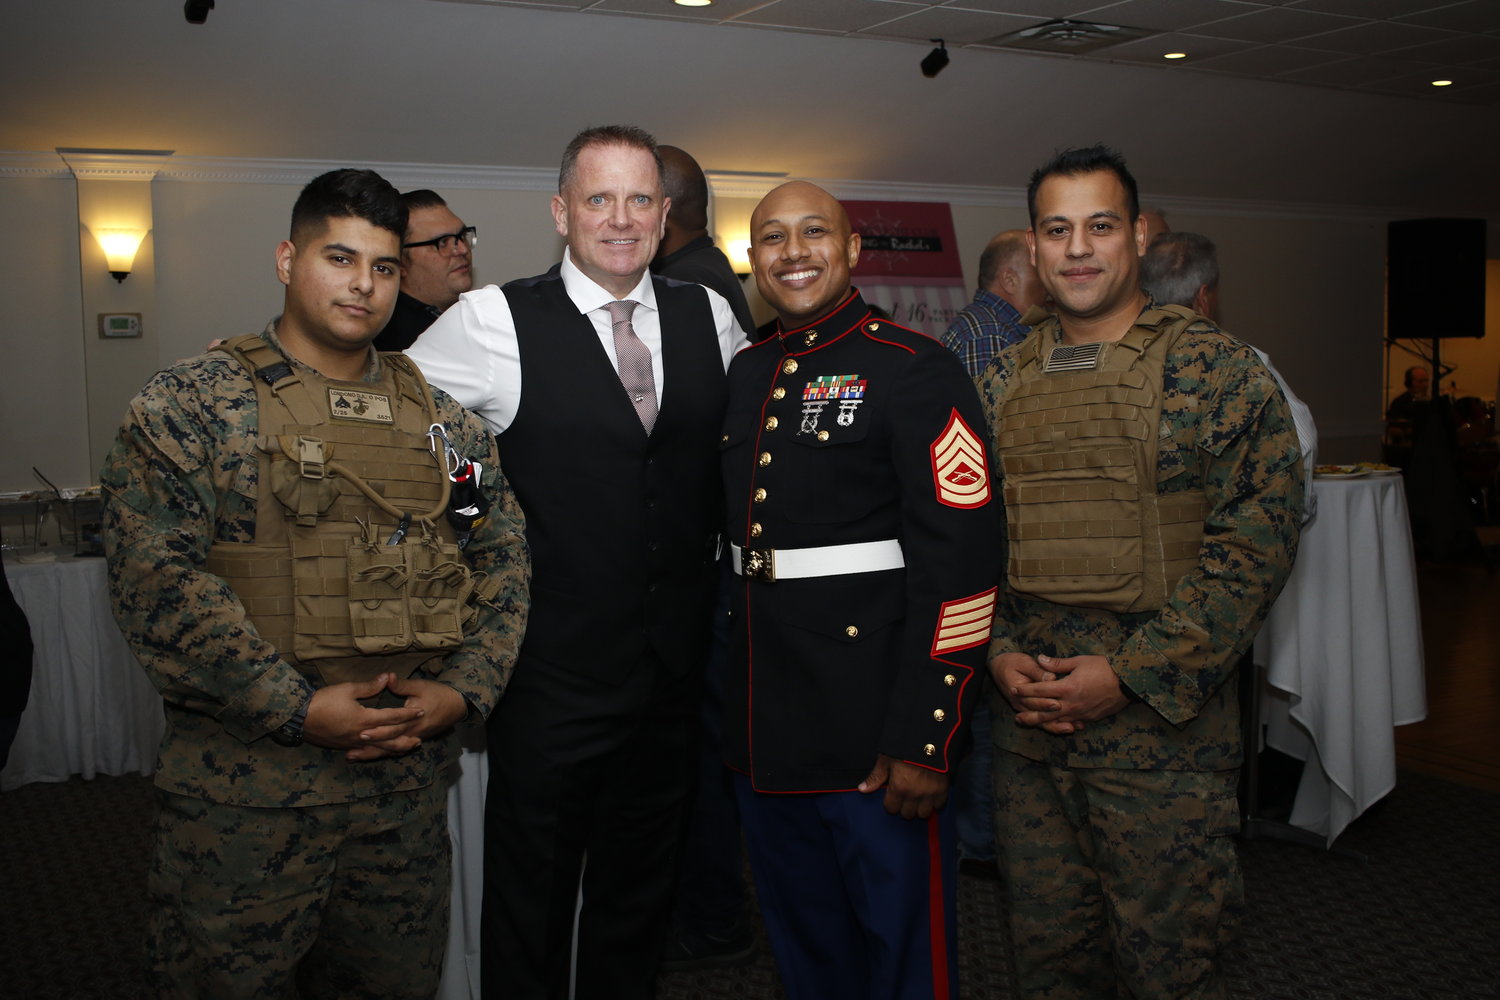 The Marines have always been a part of Toys for Tots, and several attended a fundraiser at the Freeport Yacht club on Nov. 21, above. Franzone, second from left, was joined by, from left, Andrew Londono, Fabrizio McMilland and Irvin Argueta.